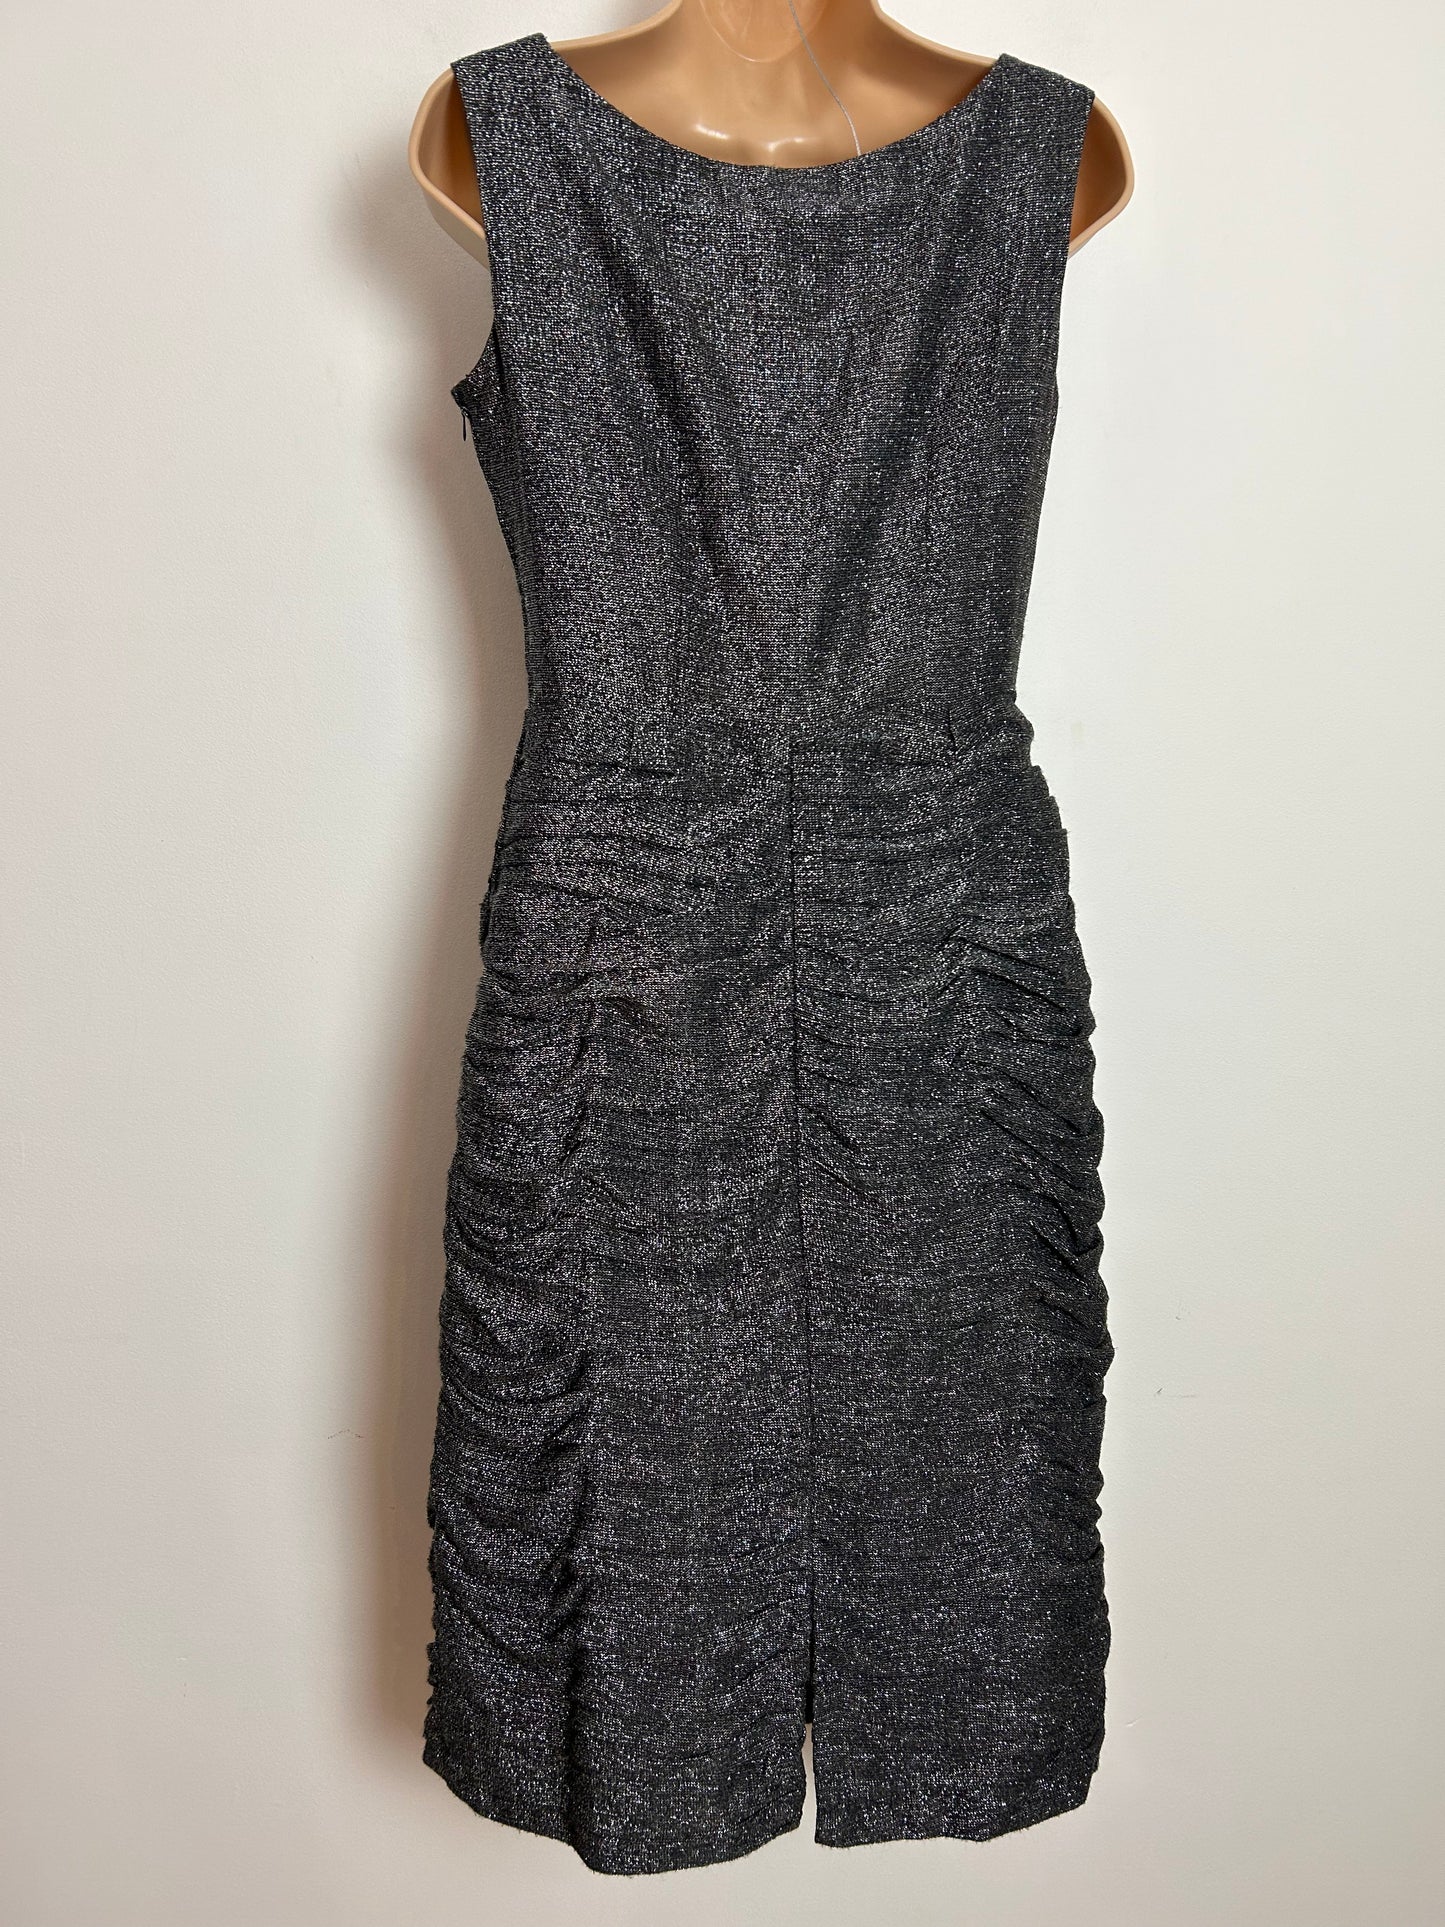 Vintage 1960s UK Size 8 Black & Silver Glittery Lurex Ruched Detail Party Evening Cocktail Dress